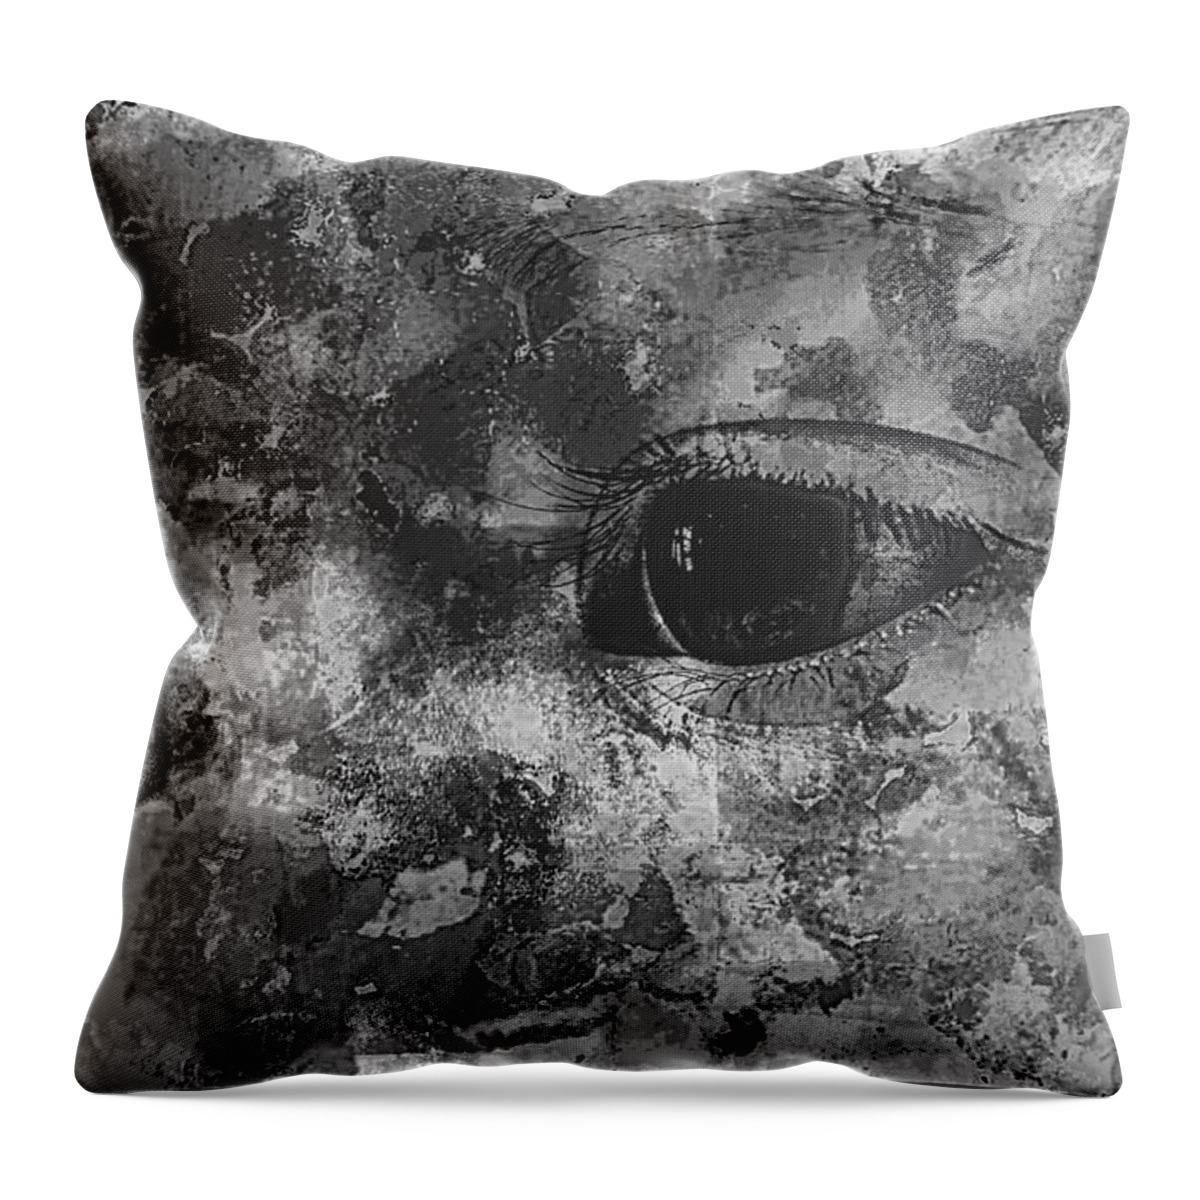 Baby Eyes Throw Pillow featuring the photograph Baby Eyes, Black and White by Jean Francois Gil